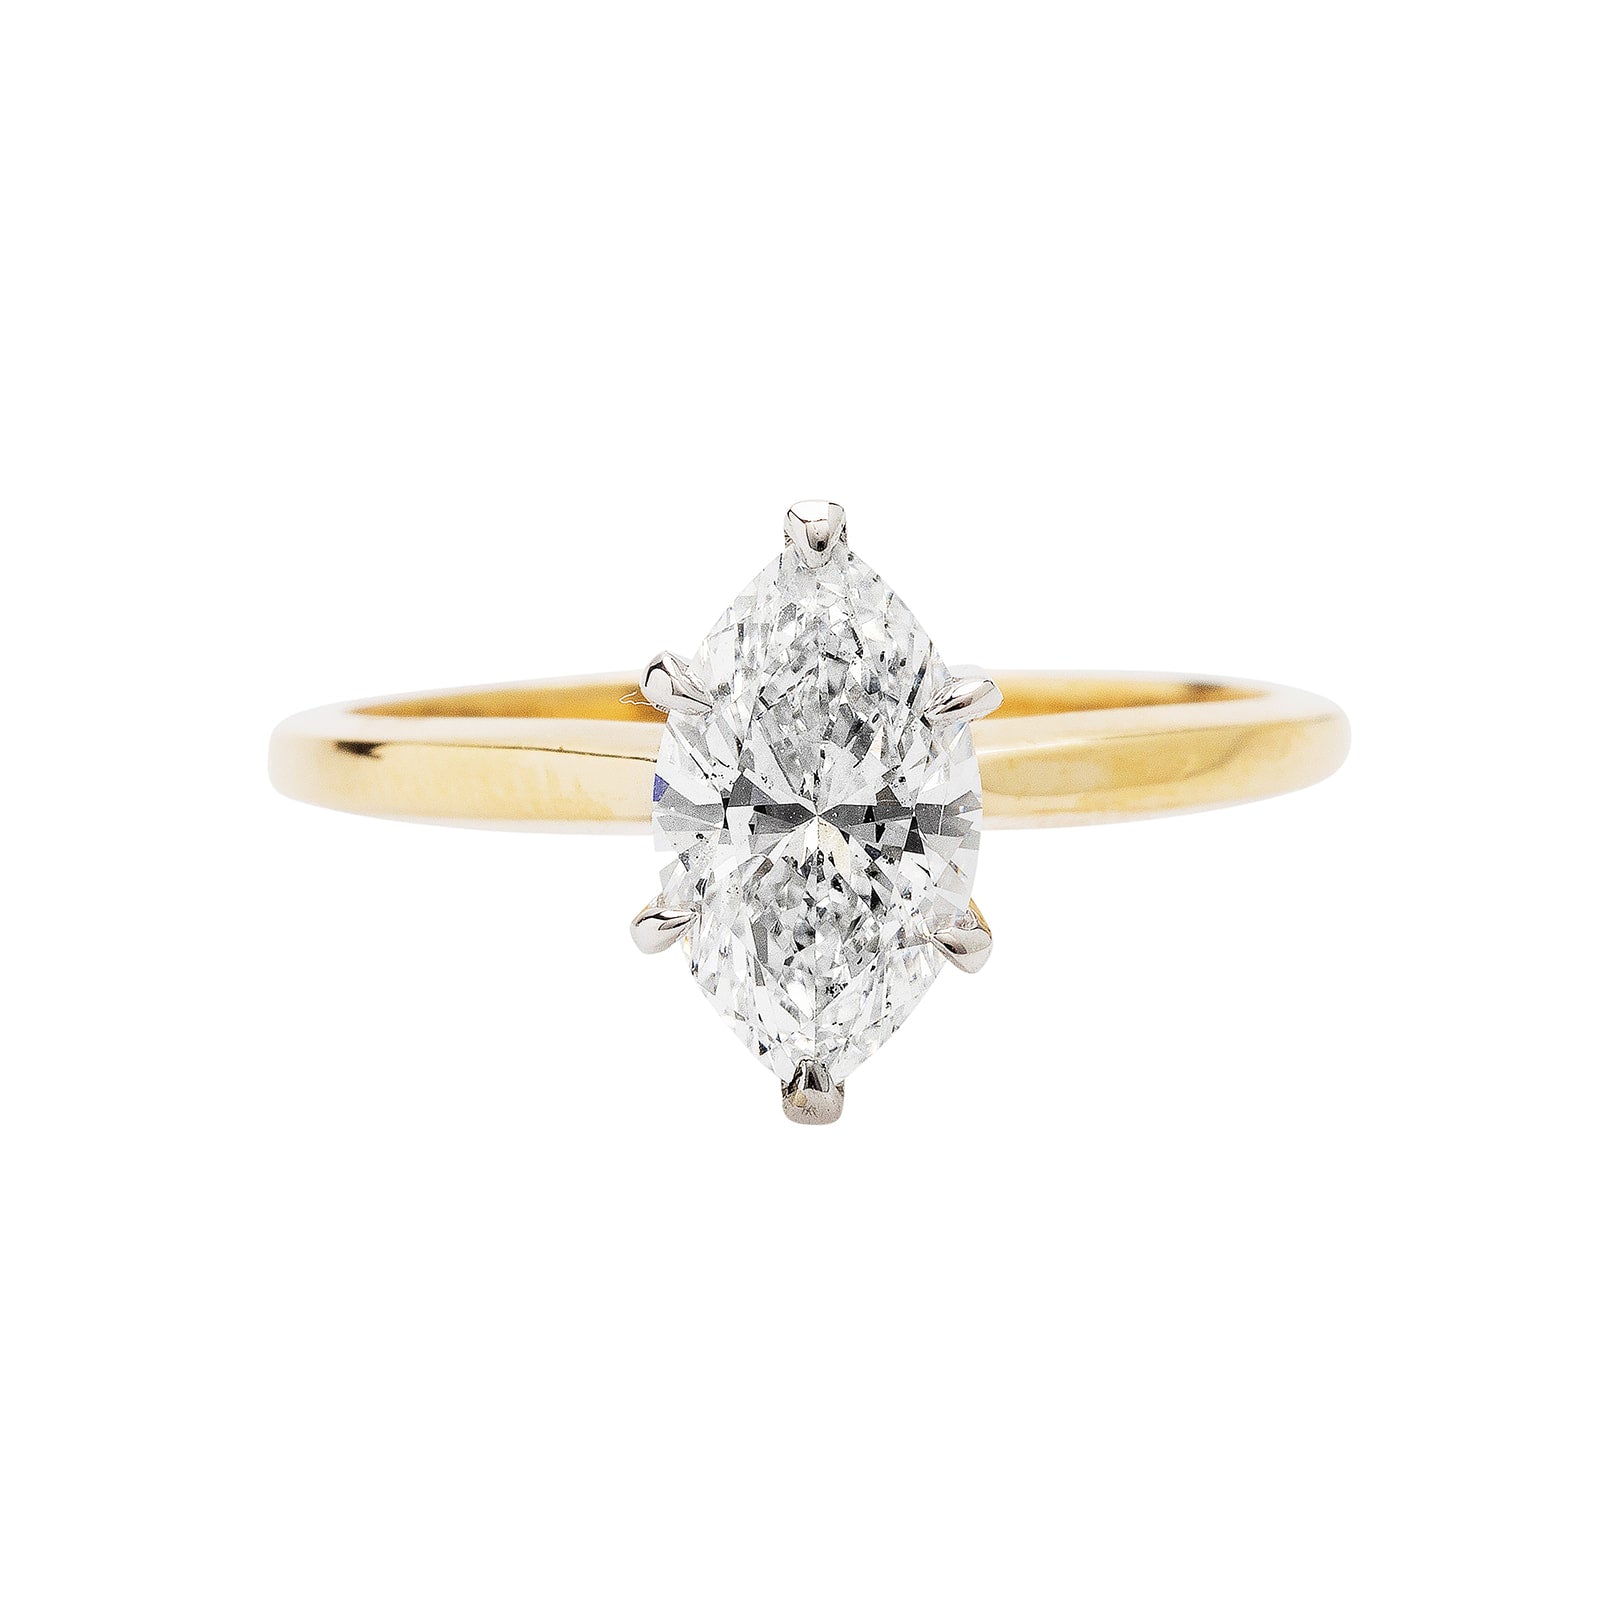 A timeless Authentic Yellow gold Marquise Cut Diamond Ring